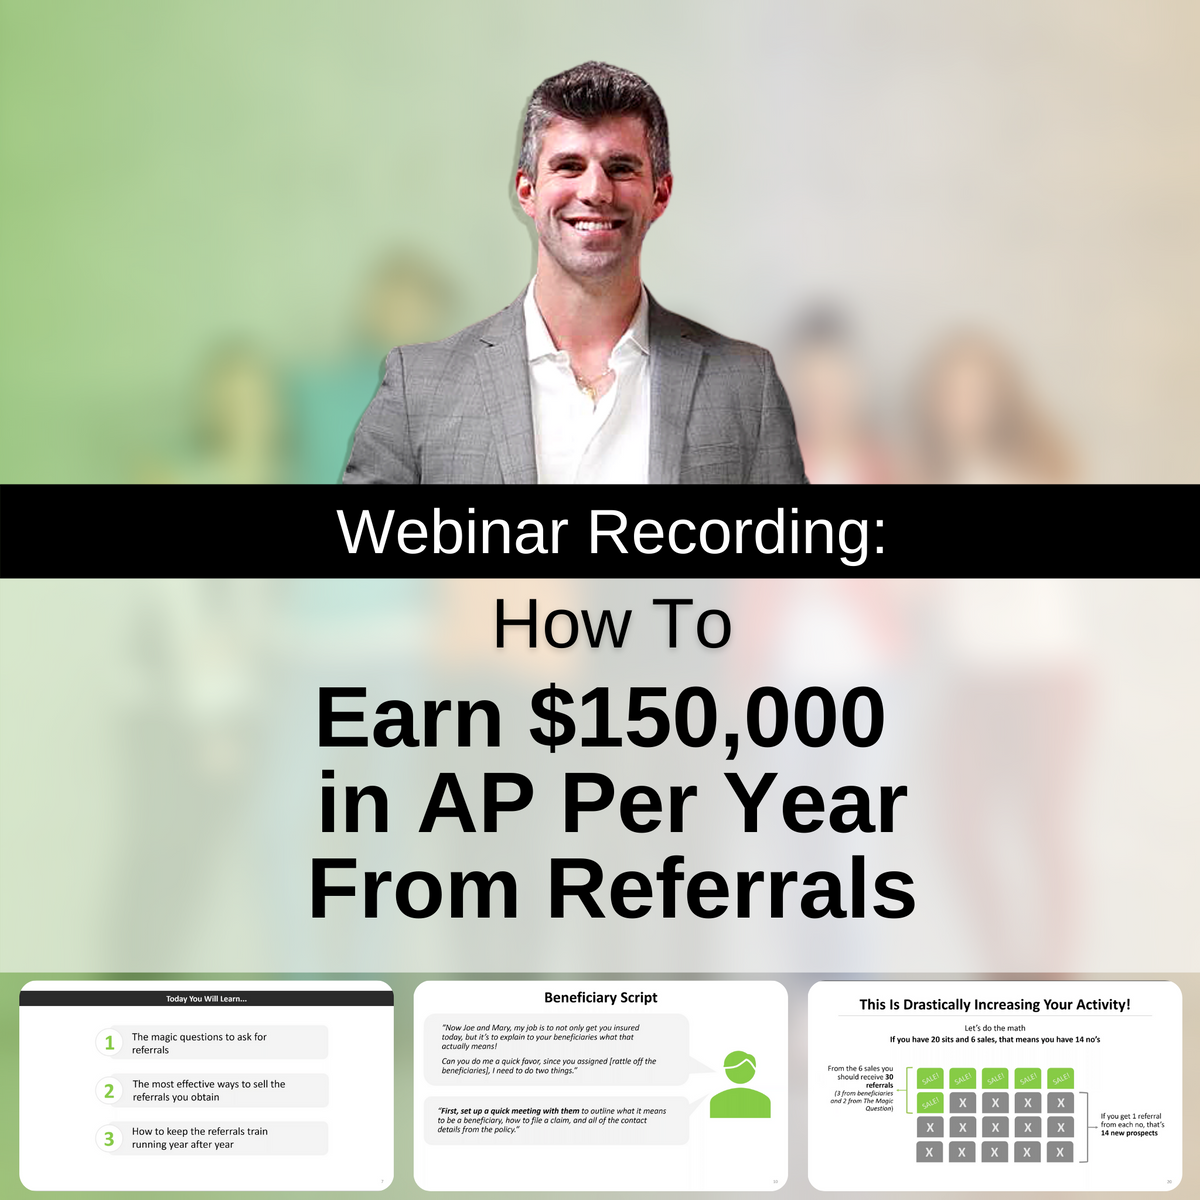 Training Video: How To Earn $150,000 in AP Per Year From Referrals